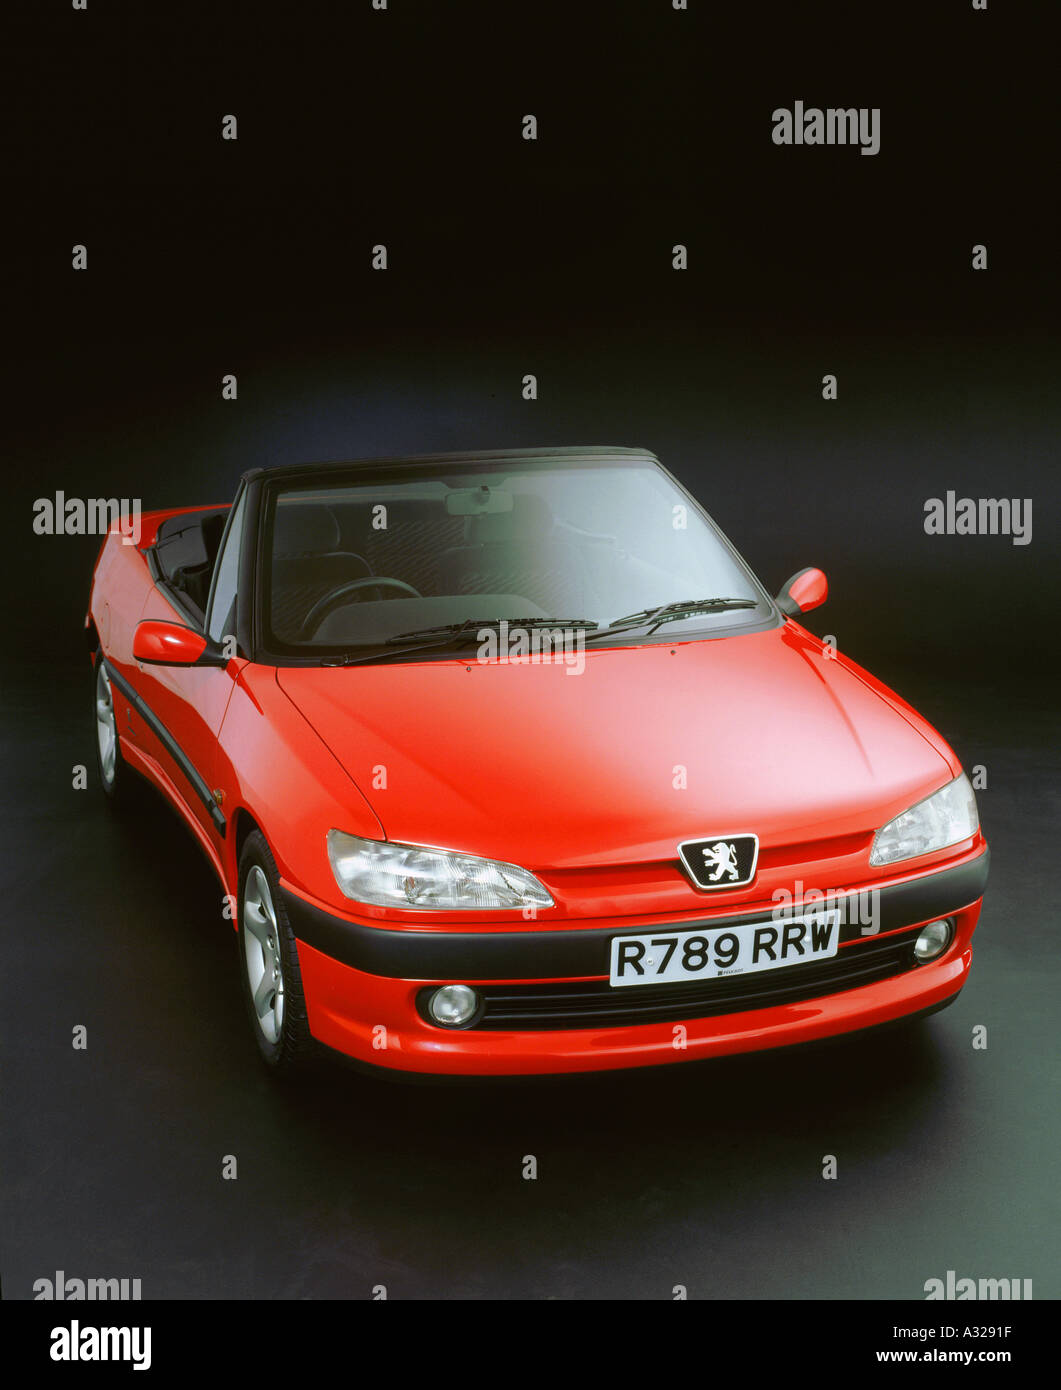 1999 Peugeot 306 cabriolet Stock Photo